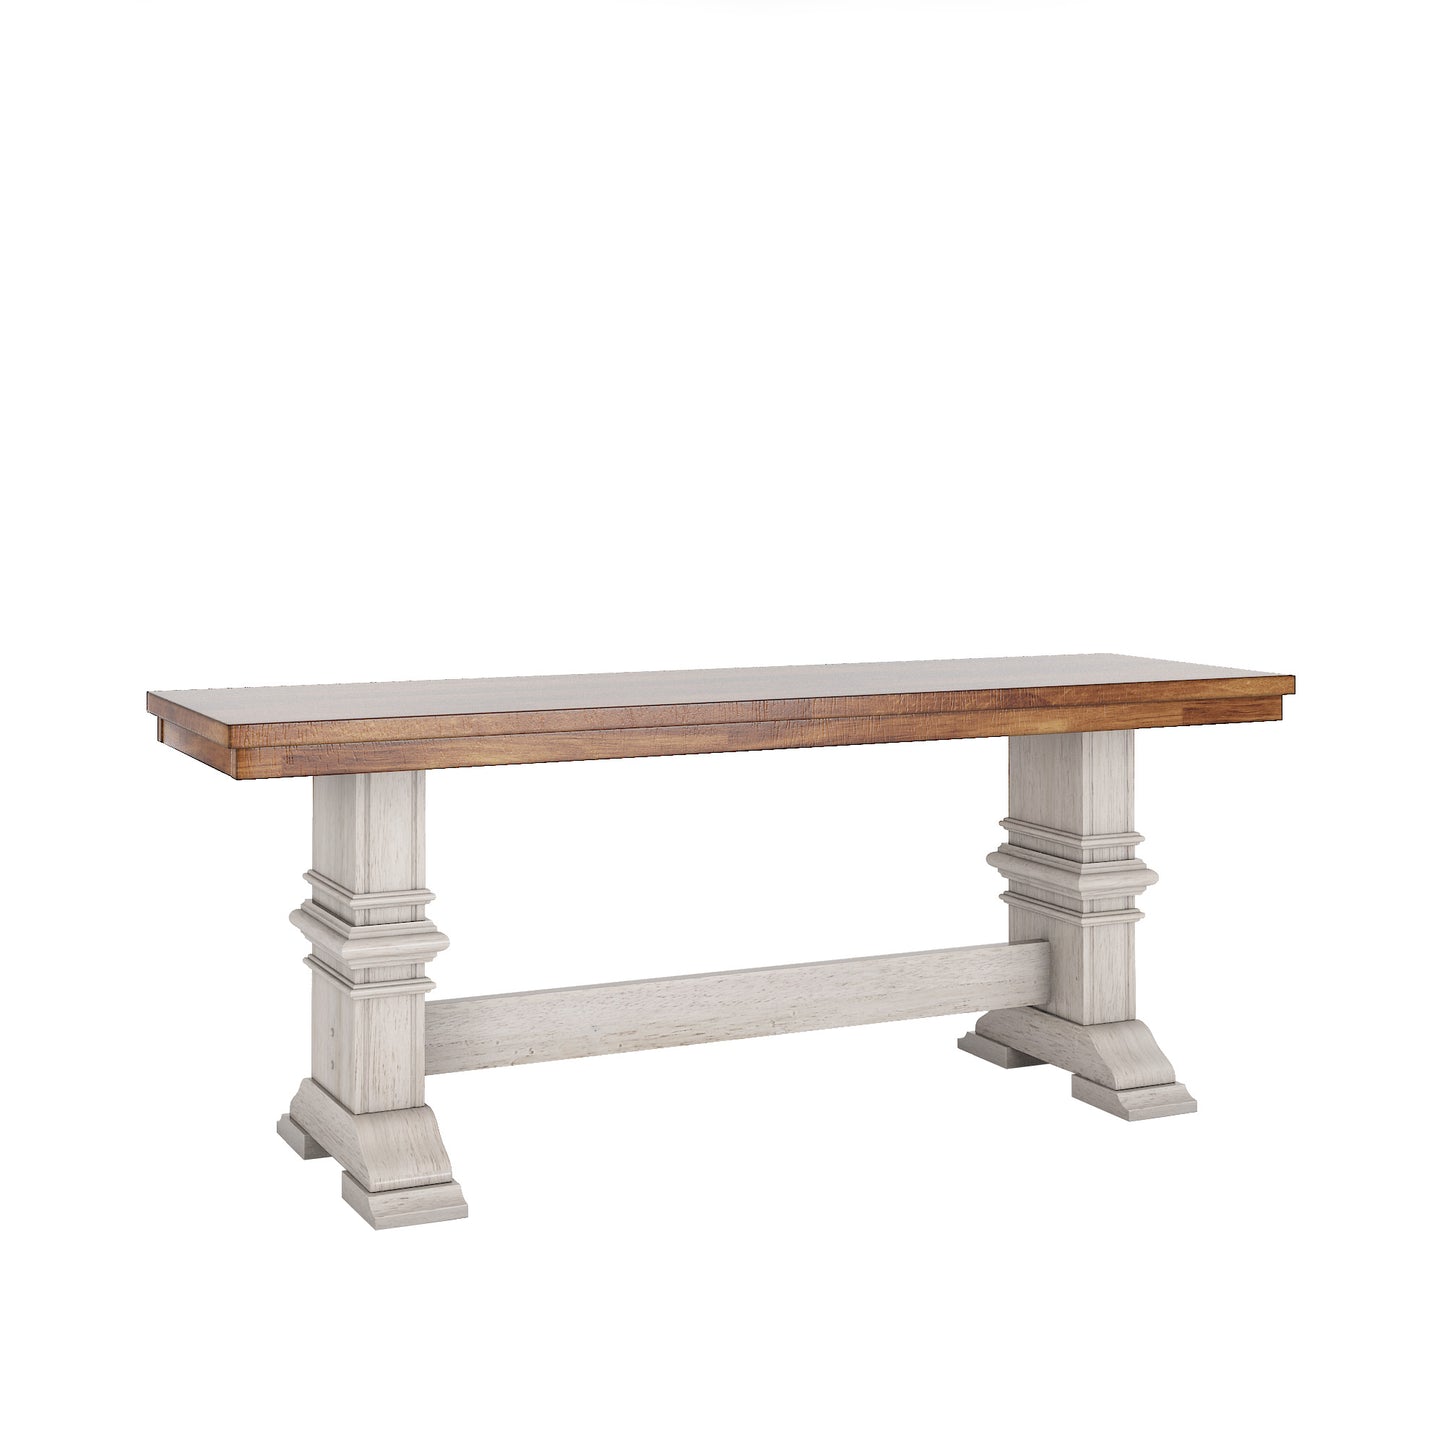 Two-Tone Trestle Leg Wood Dining Bench - Oak Top with Antique White Base